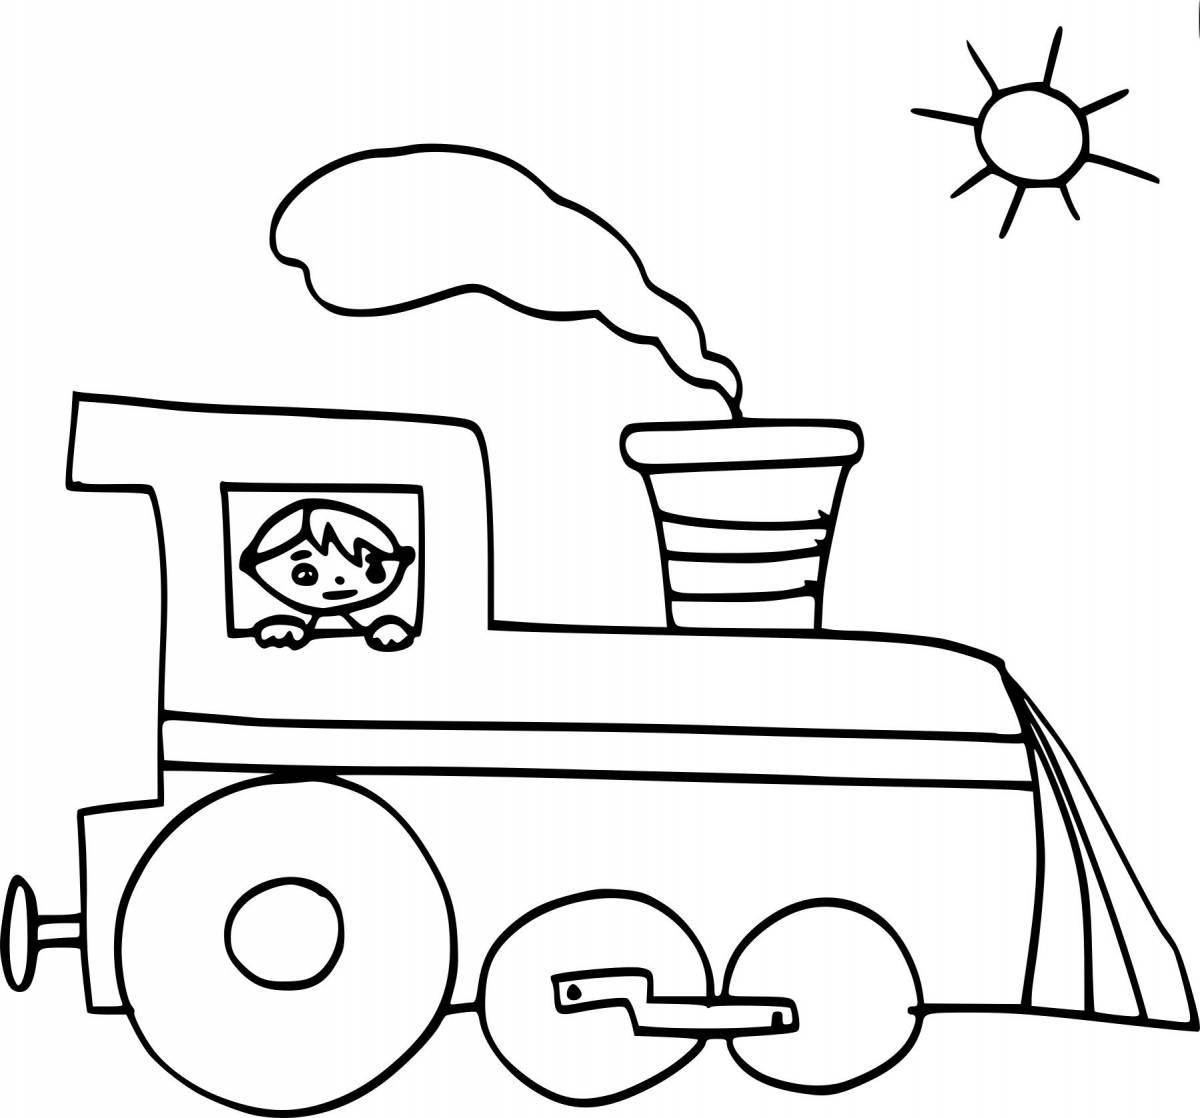 Playful train coloring page for babies 2-3 years old